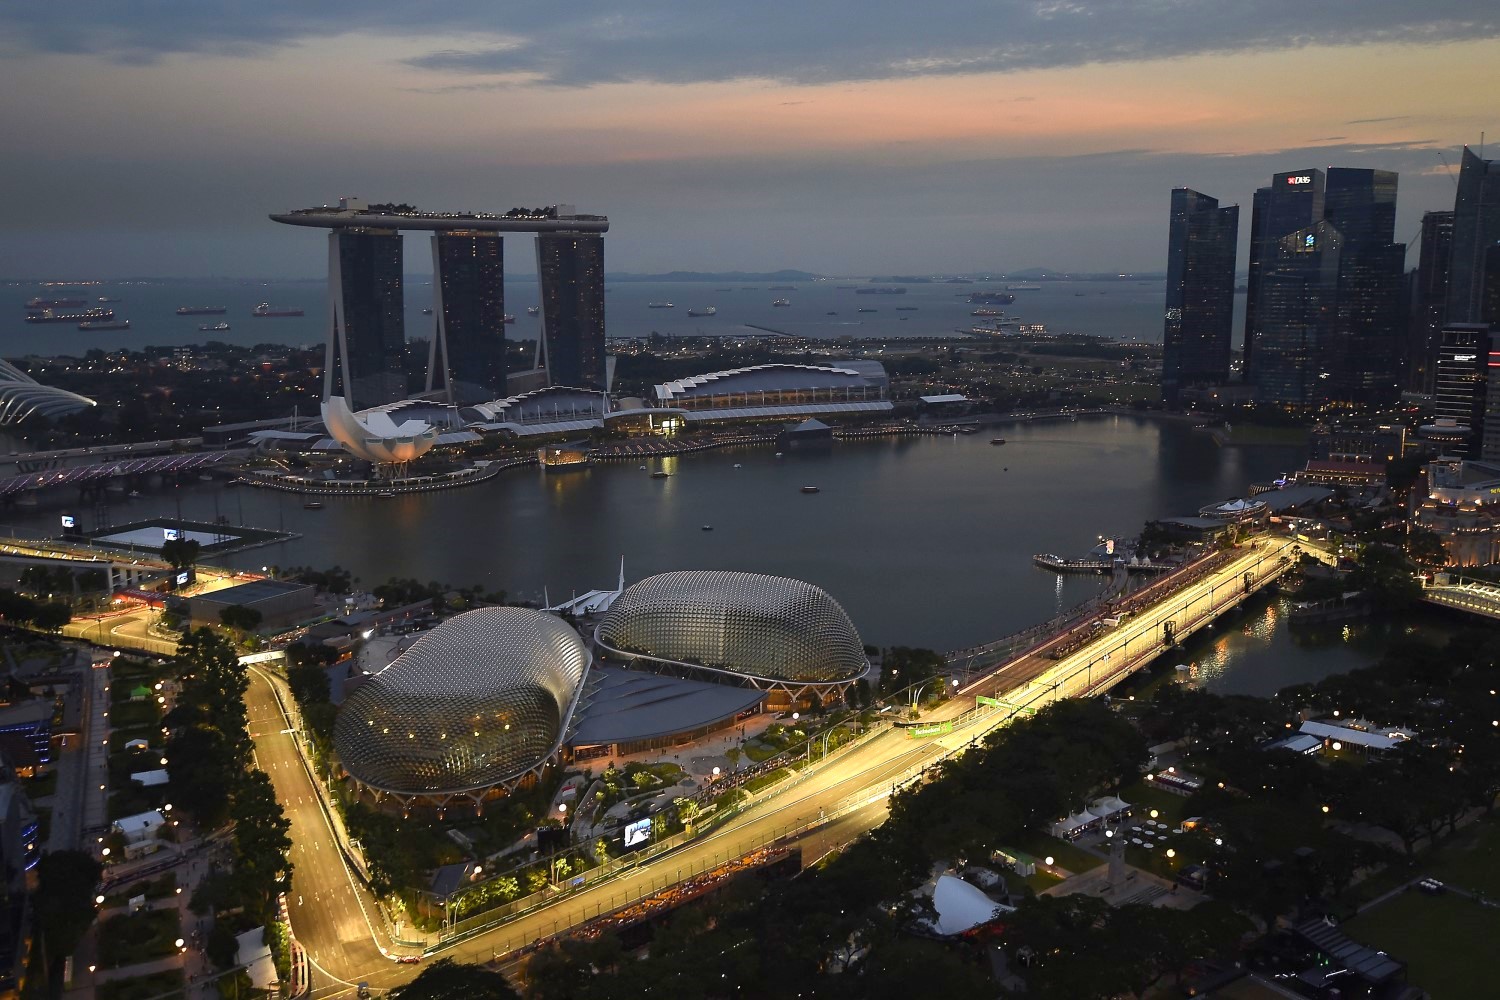 Singapore is spectacular but loses tens of millions of dollars each year